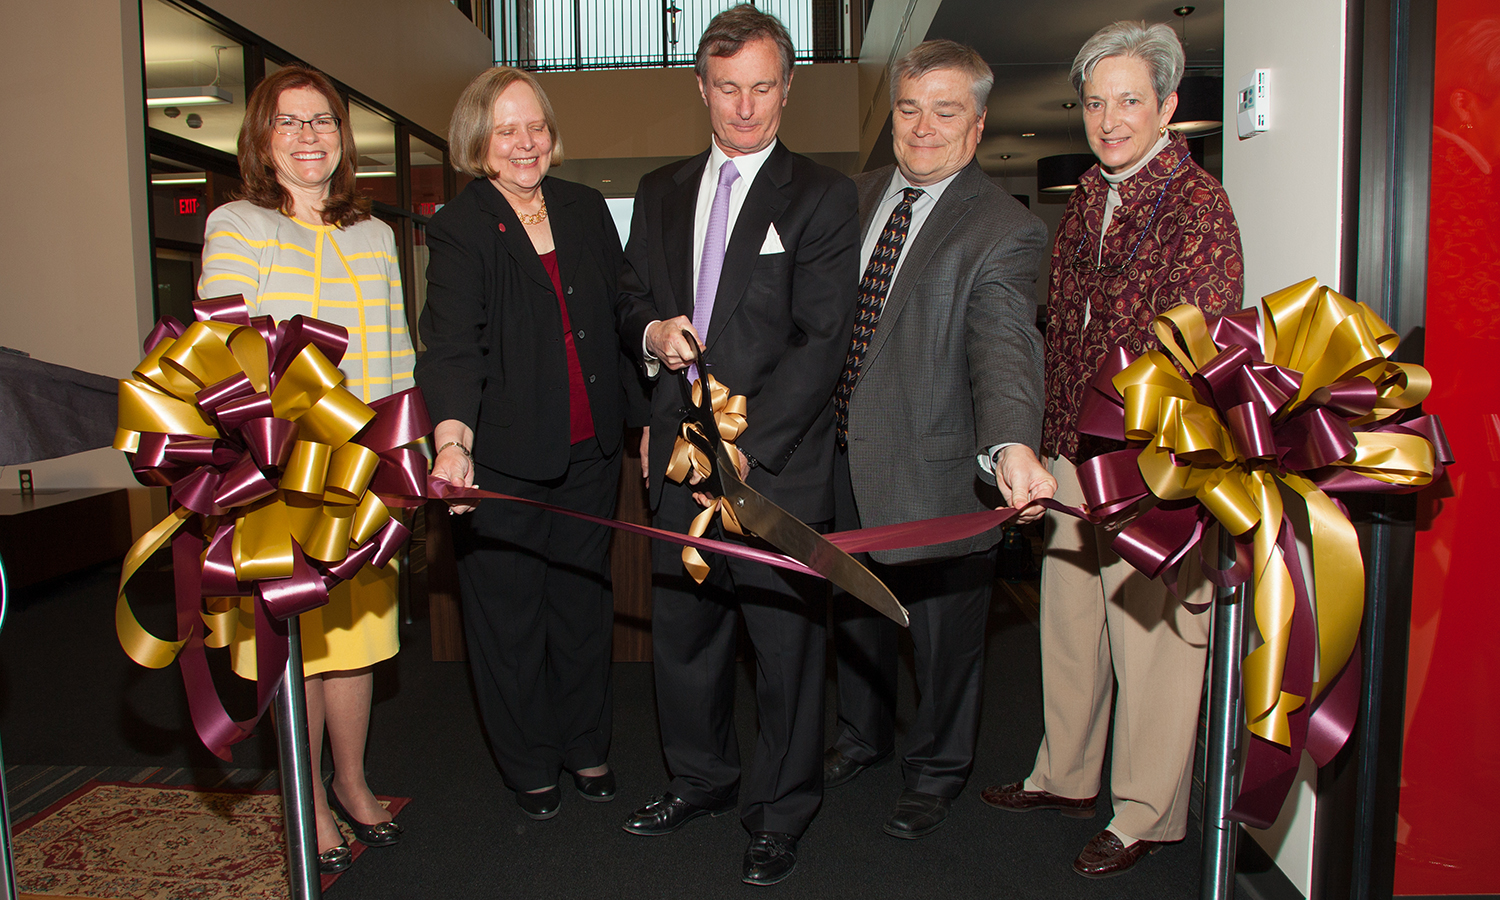 From left: Provost and Executive Vice President for Academic Affairs Garnett S. Stokes; Dean of Undergraduate Studies Karen Laughlin; alumnus and former trustee David Ford; President Eric J. Barron; and Dean of The Graduate School Nancy Marcus.